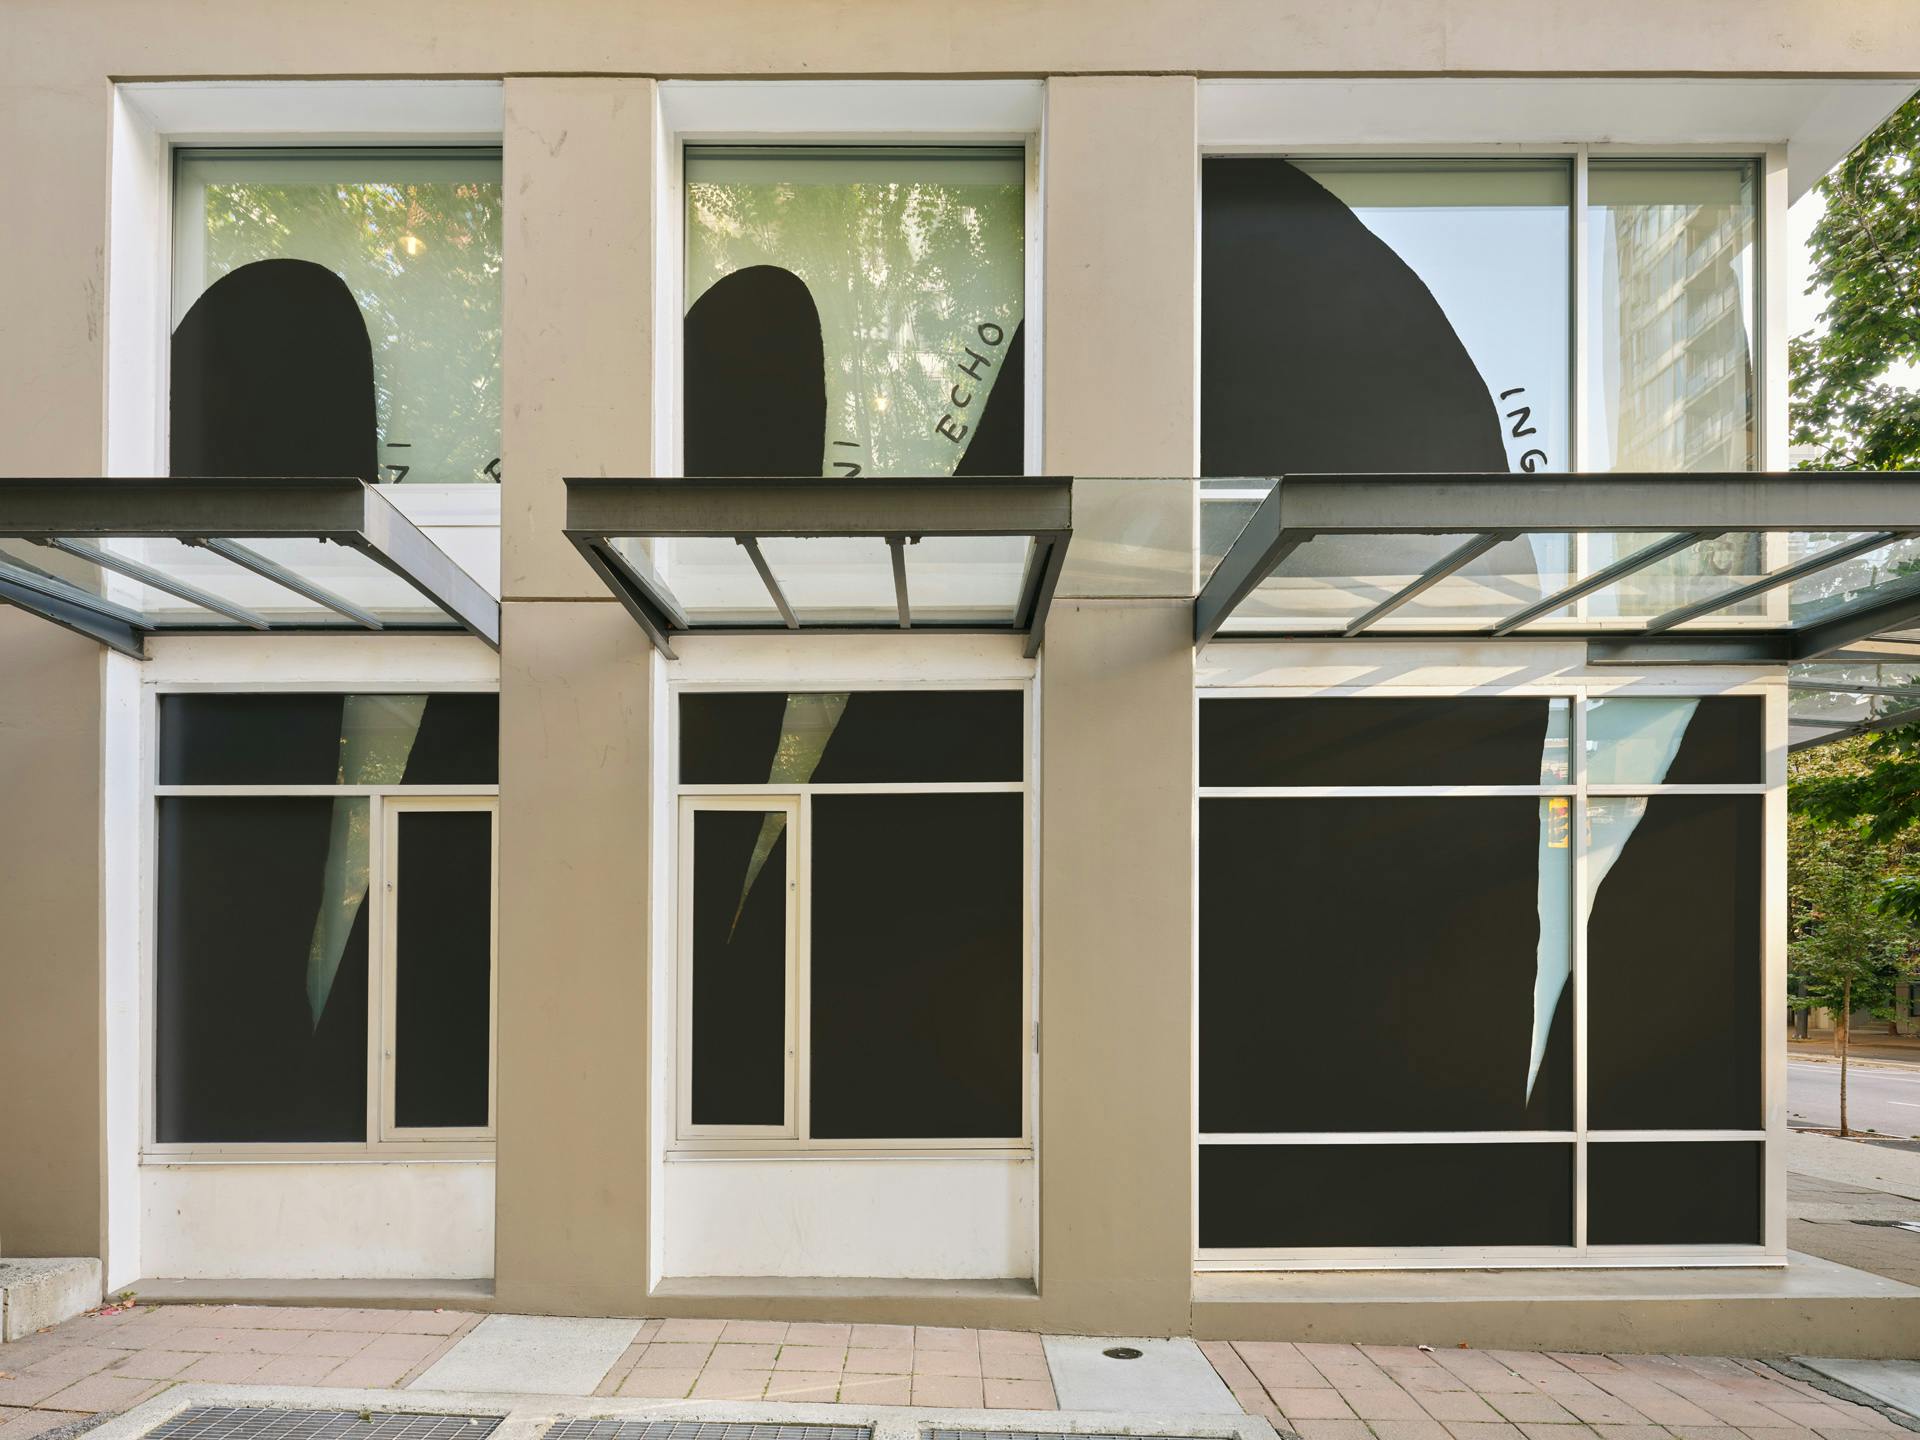 Facade of CAG with with two rows of windows visible in frame. Black and white drawings by Christine Sun Kim featuring the word "echoing" across the windows.